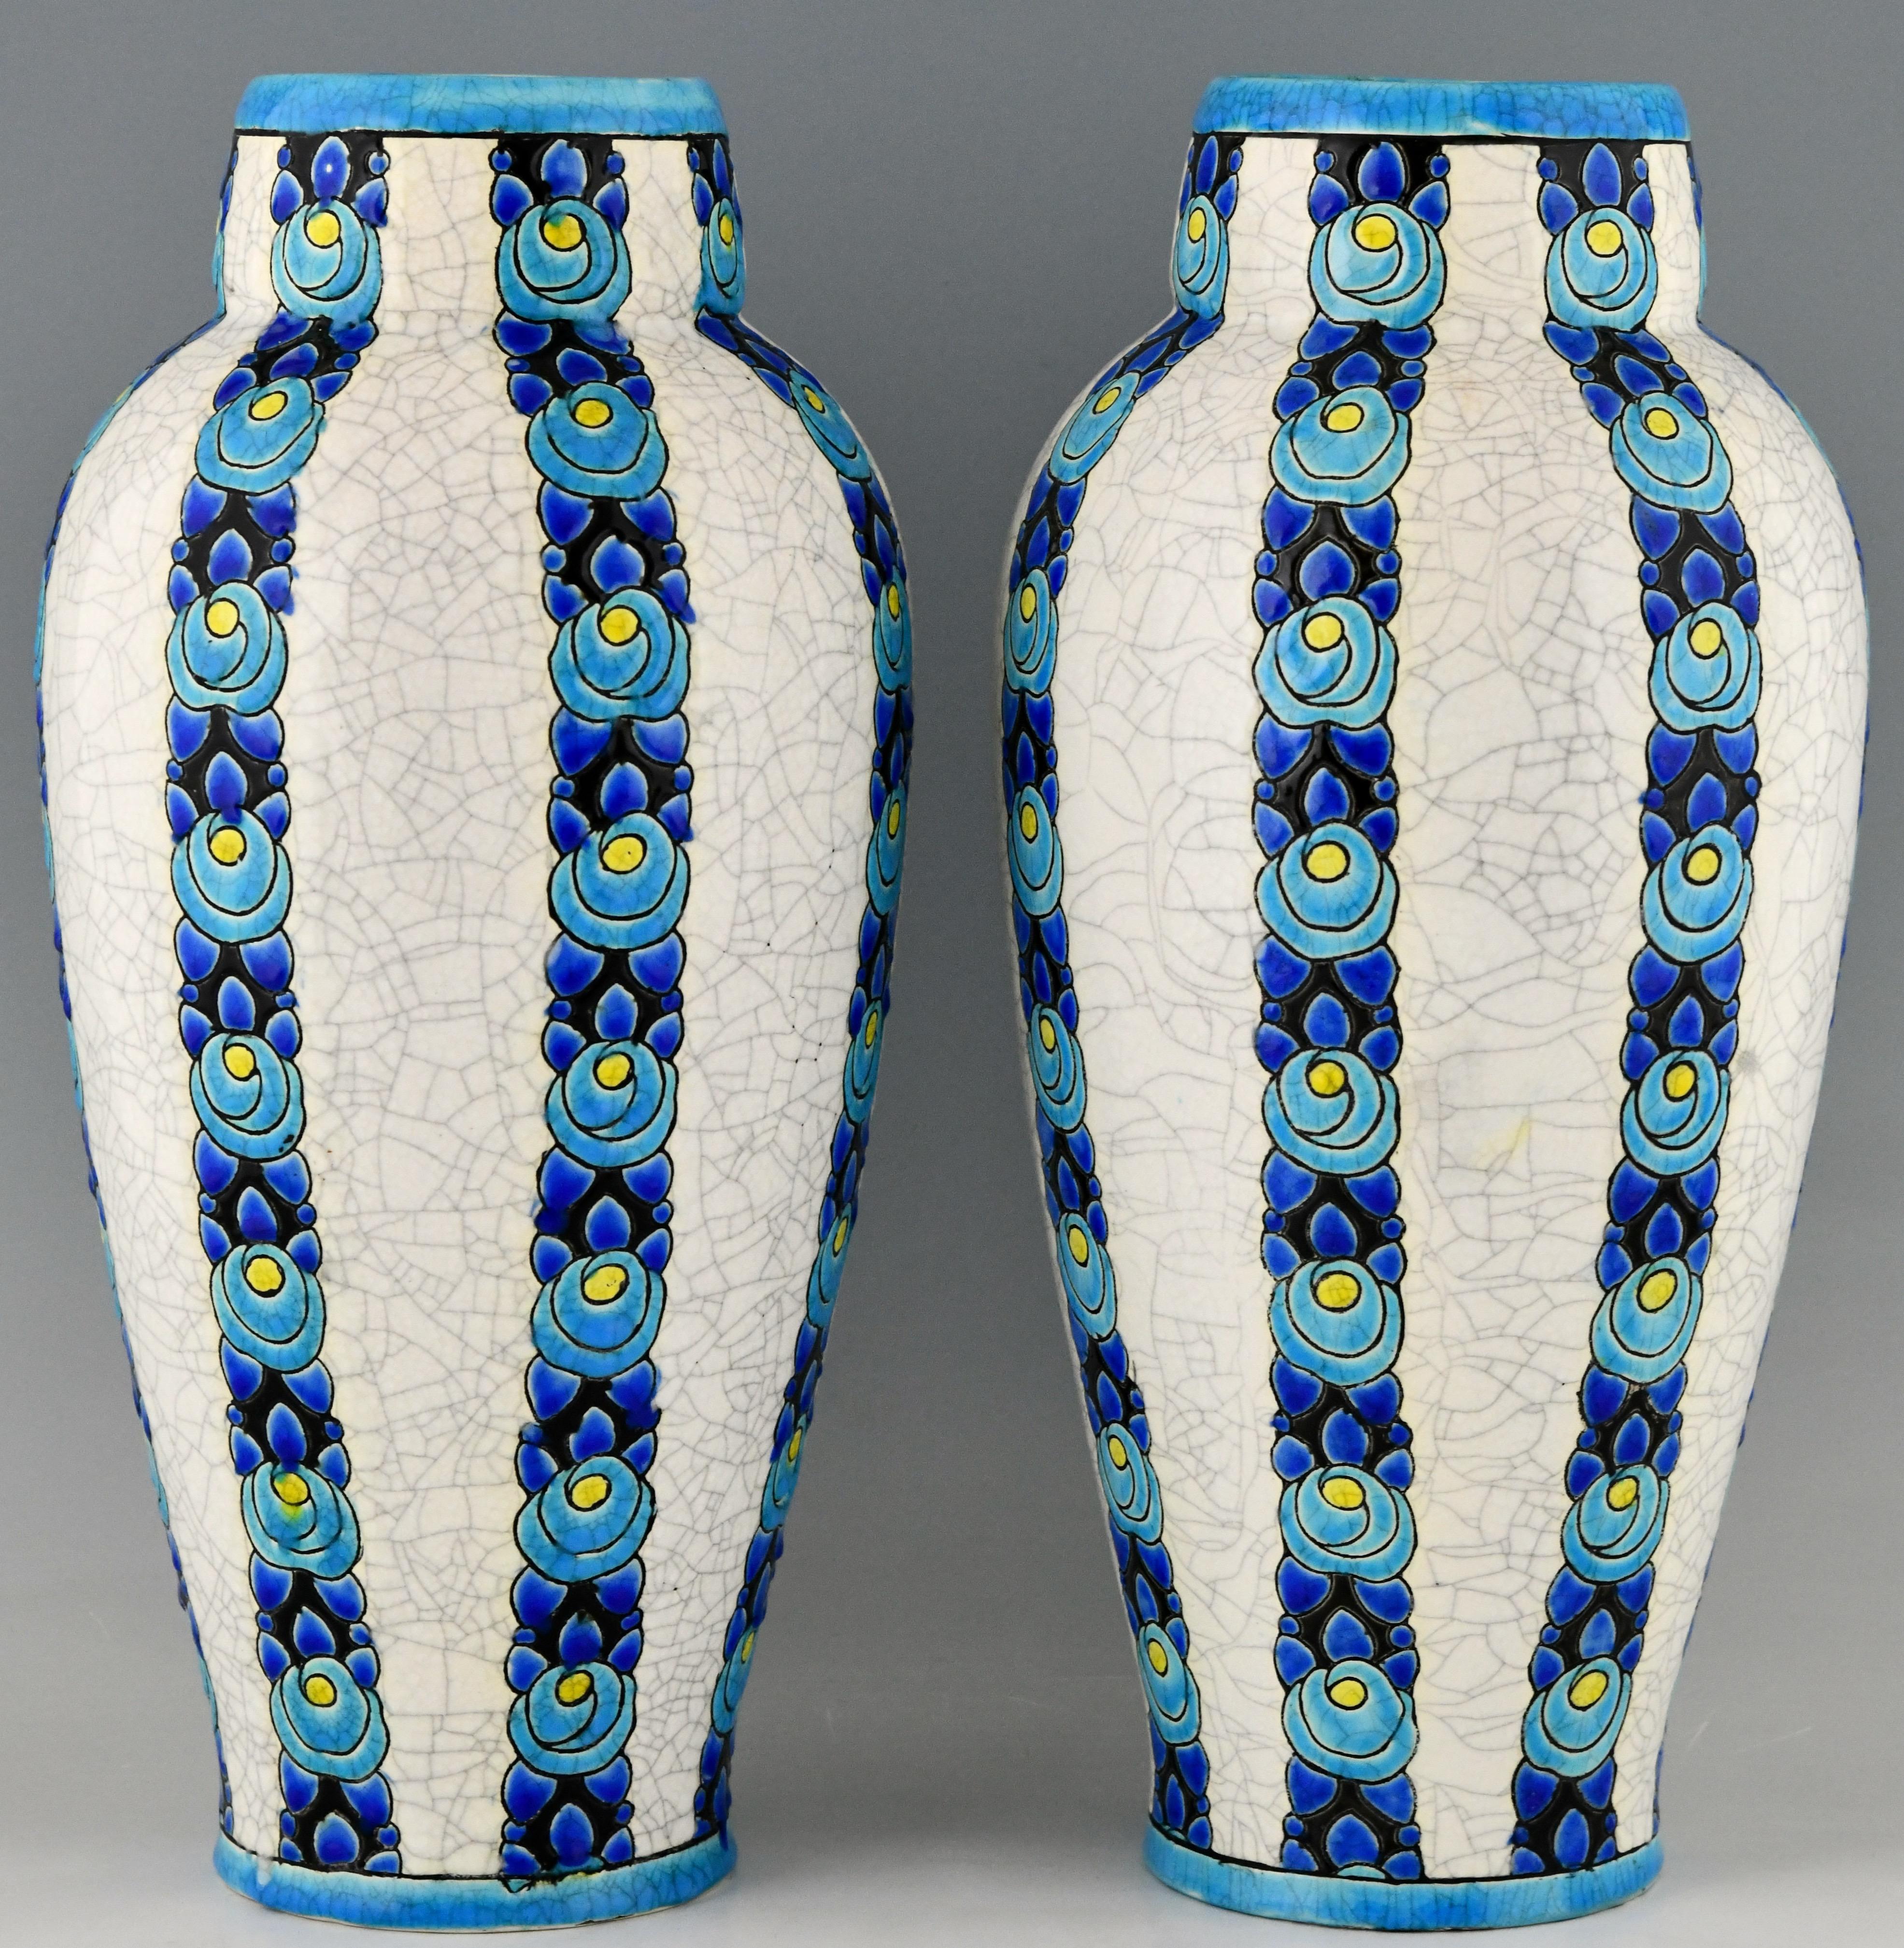 Early 20th Century Pair of Art Deco Vases by Boch Freres Charles Catteau, Belgium, 1922